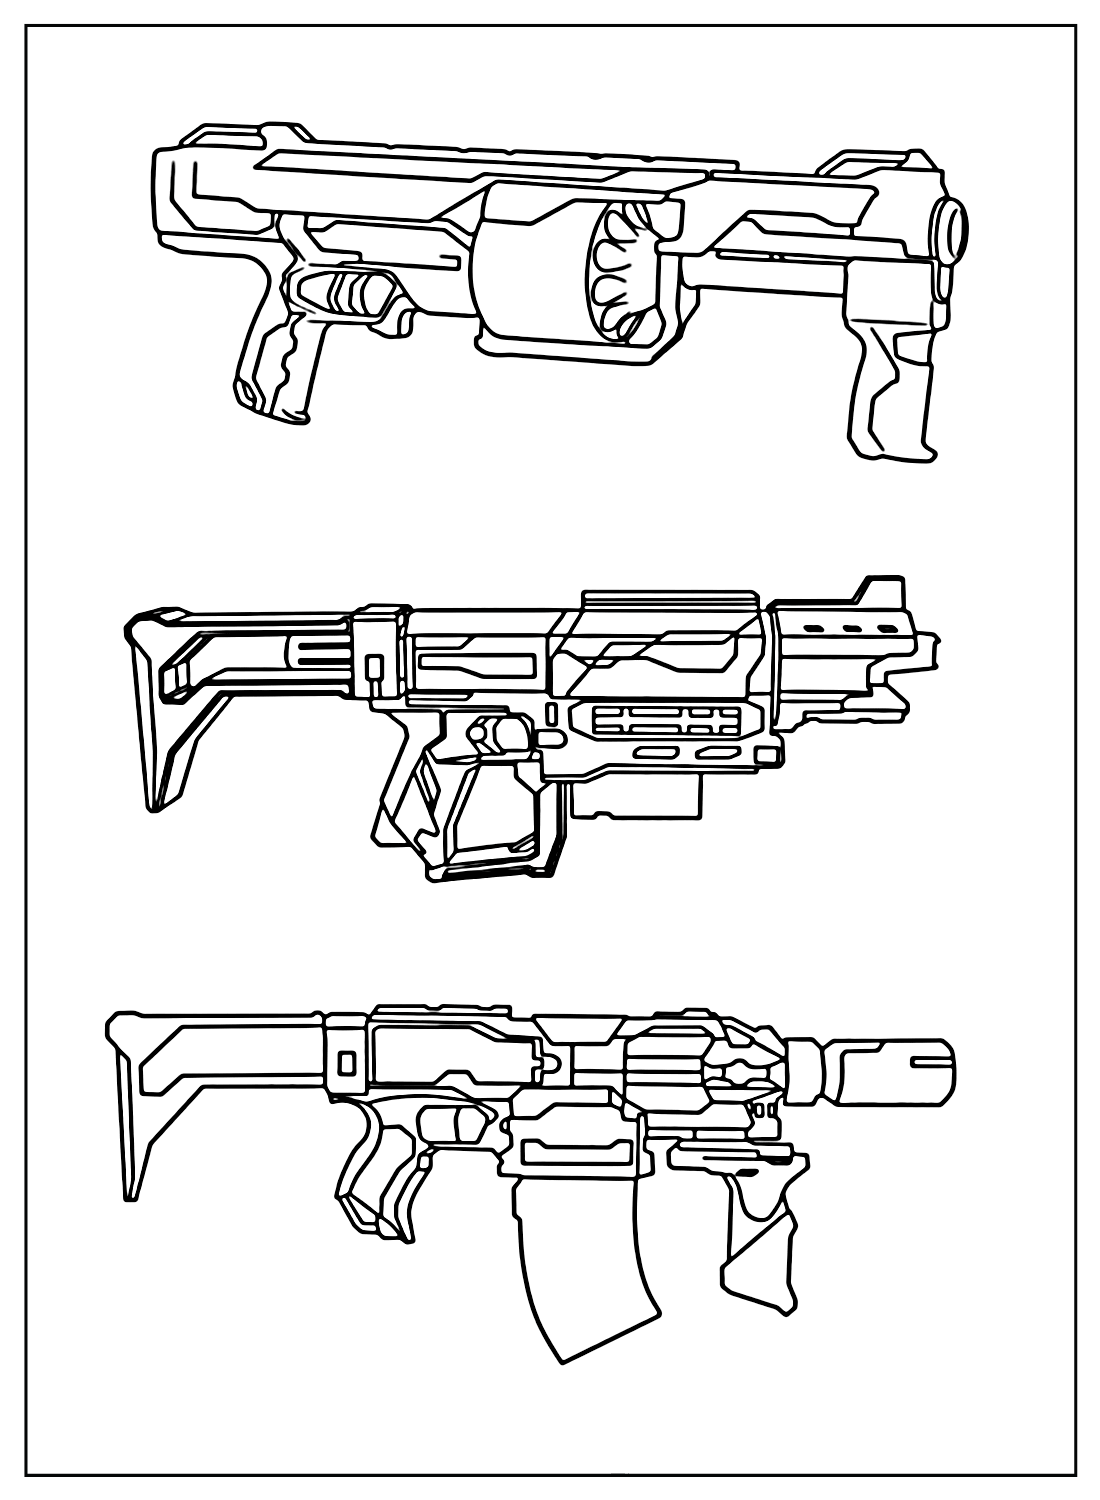 Weapons Coloirng Page Apex Legends from Apex Legends